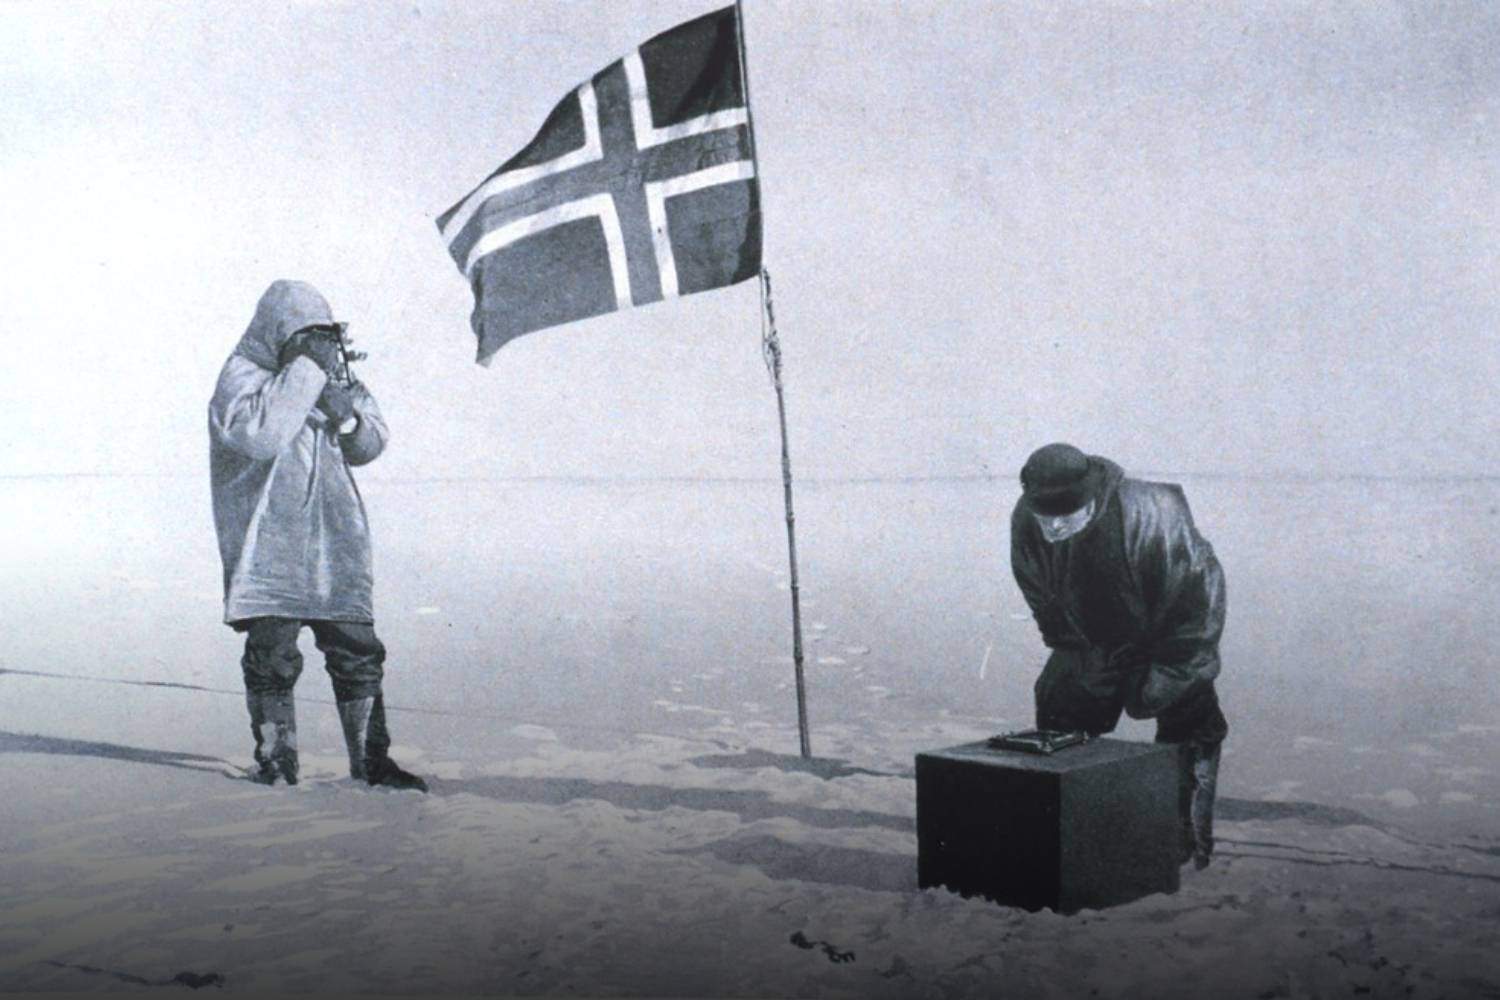 on this day 14 December Norwegian South Pole